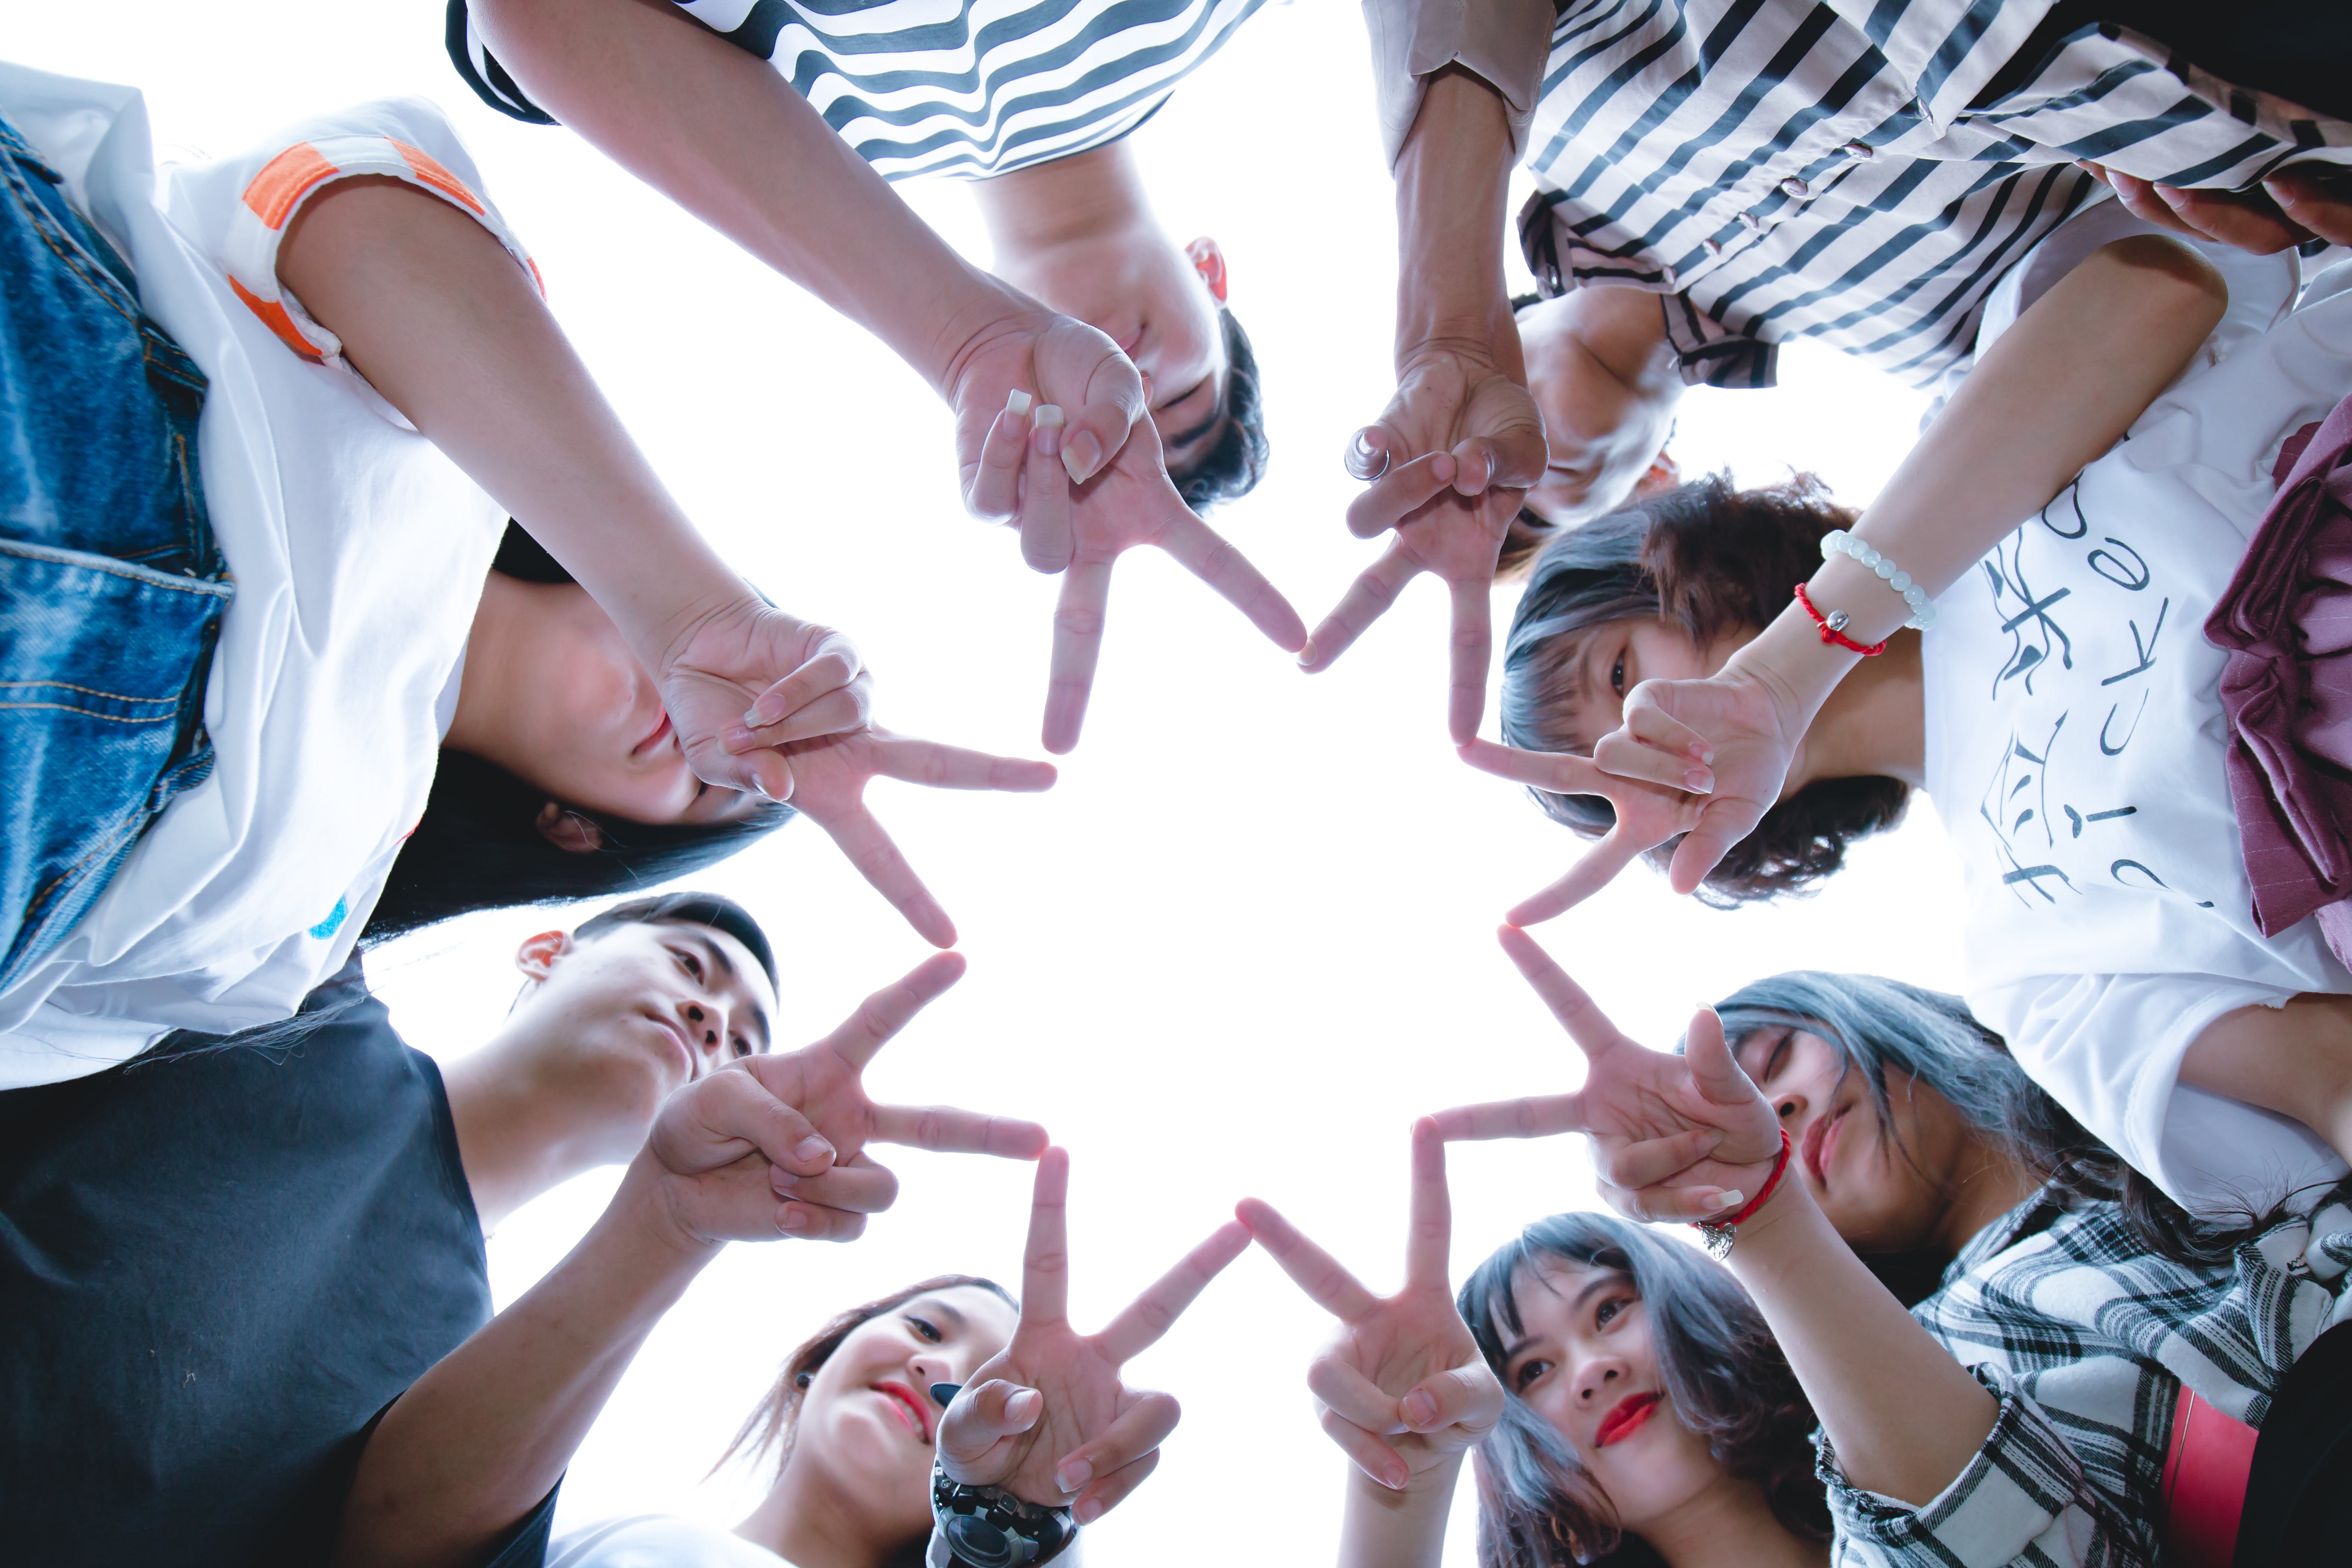 A group of eight friends forming a star shape with their hands.